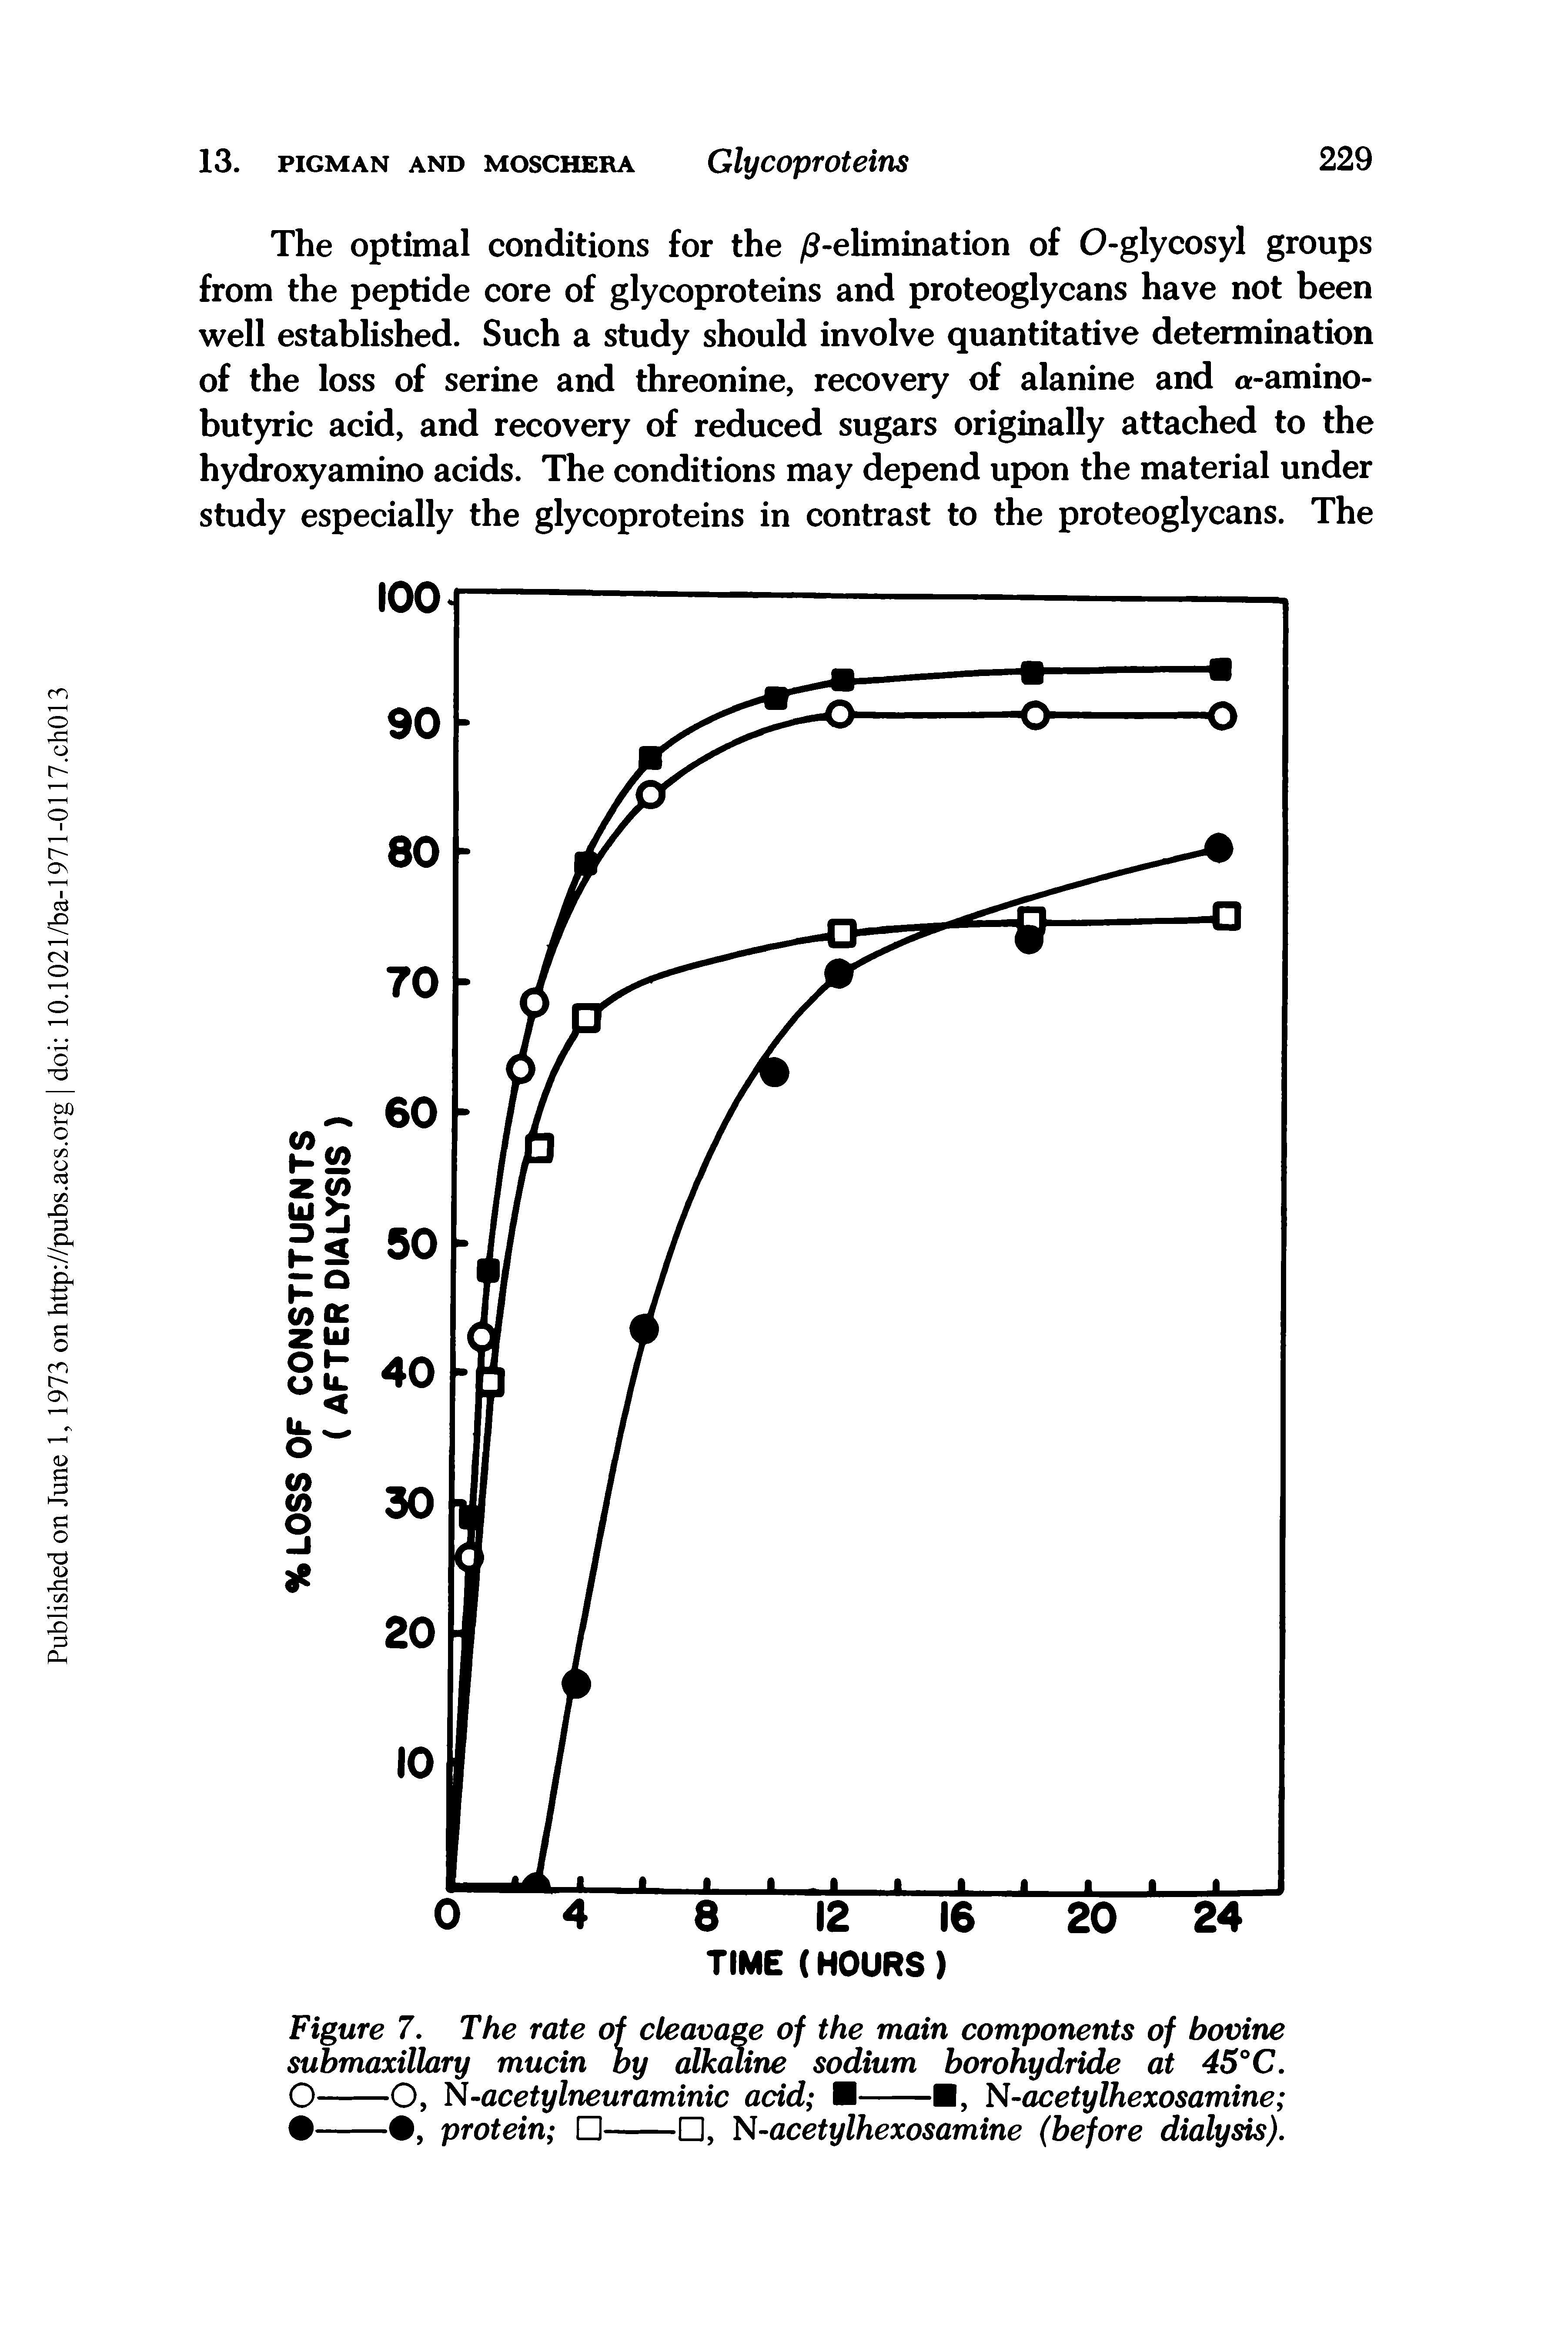 Figure 7. The rate of cleavage of the main components of bovine submaxillary mucin by alkaline sodium borohydride at 45° C.